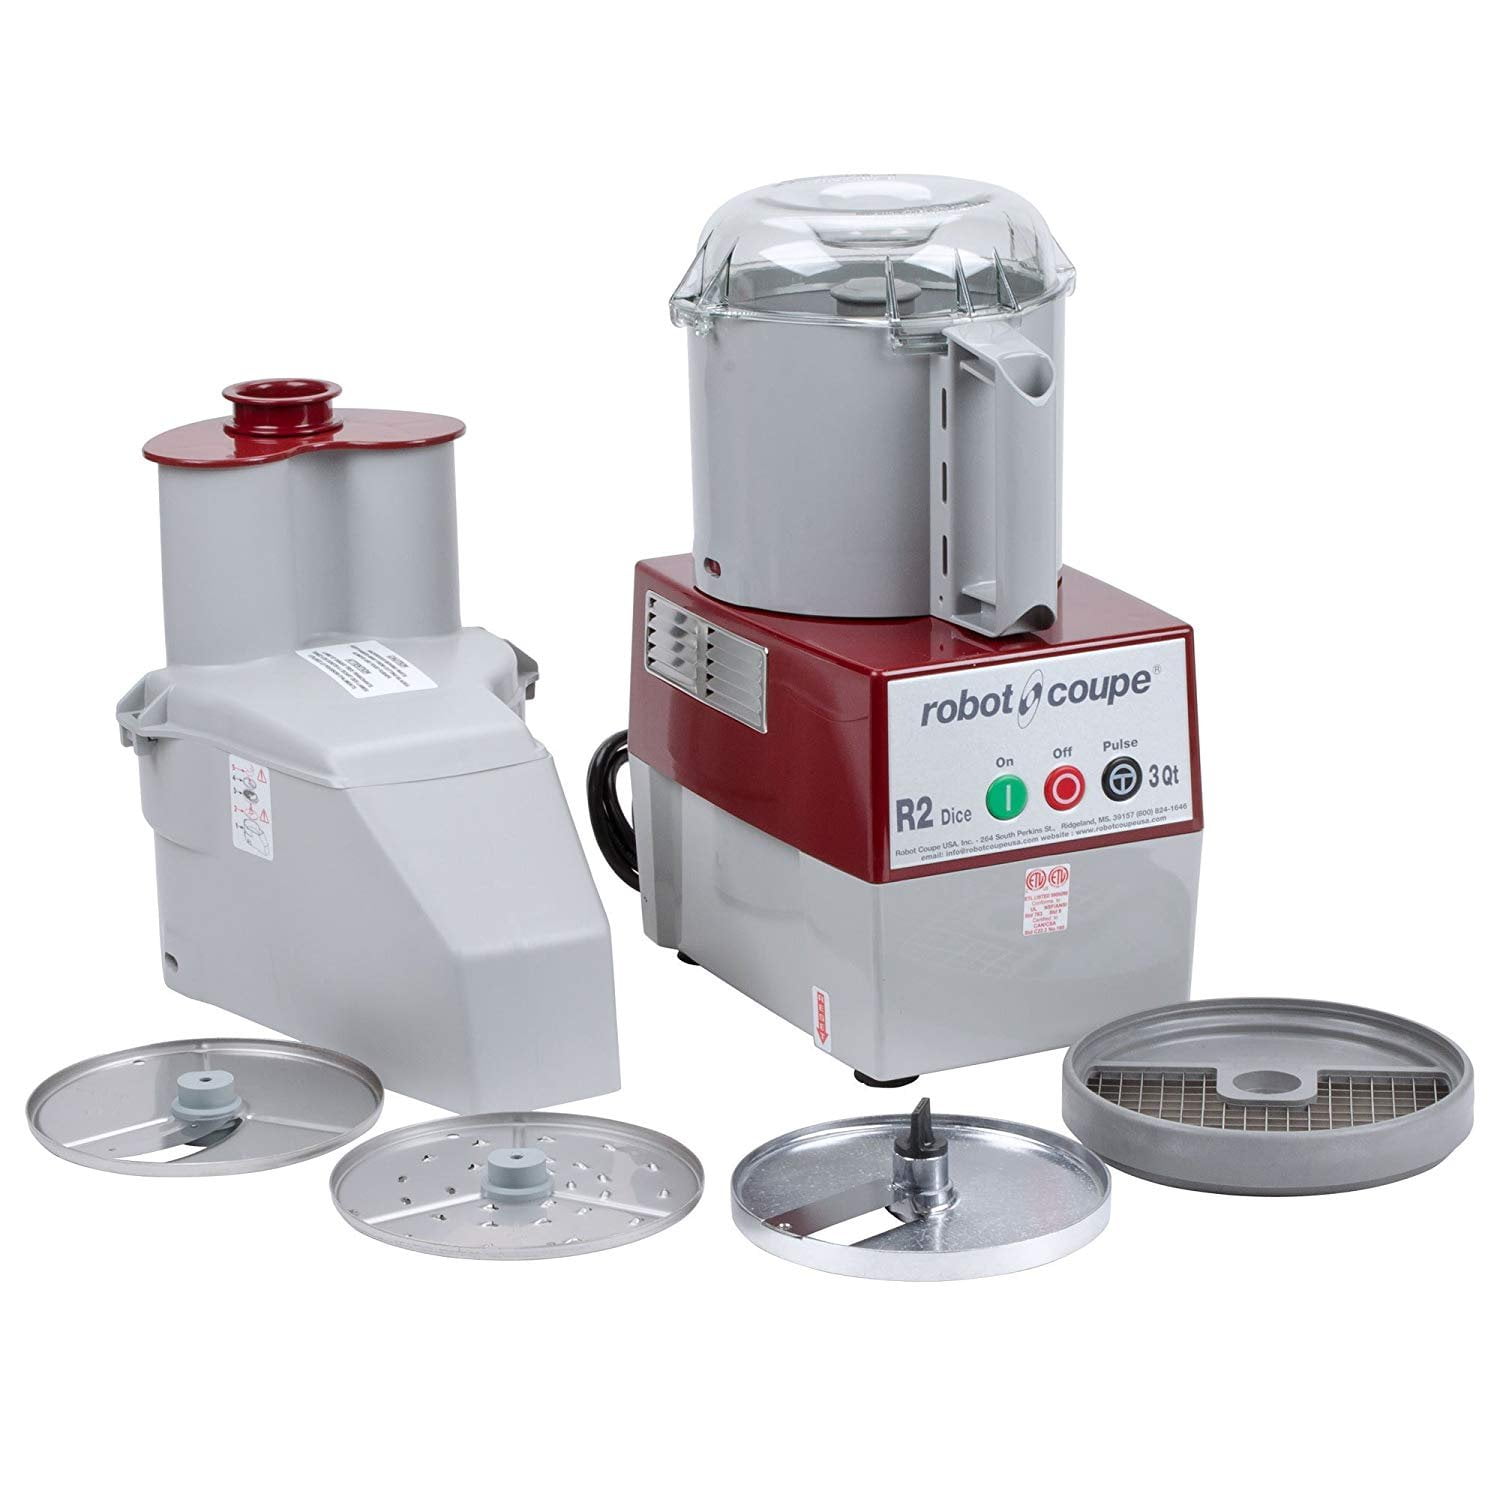 hulkende leder Manners Robot Coupe - R2 DICE - 3 L 2 HP Continuous Feed Food Processor -  Walmart.com